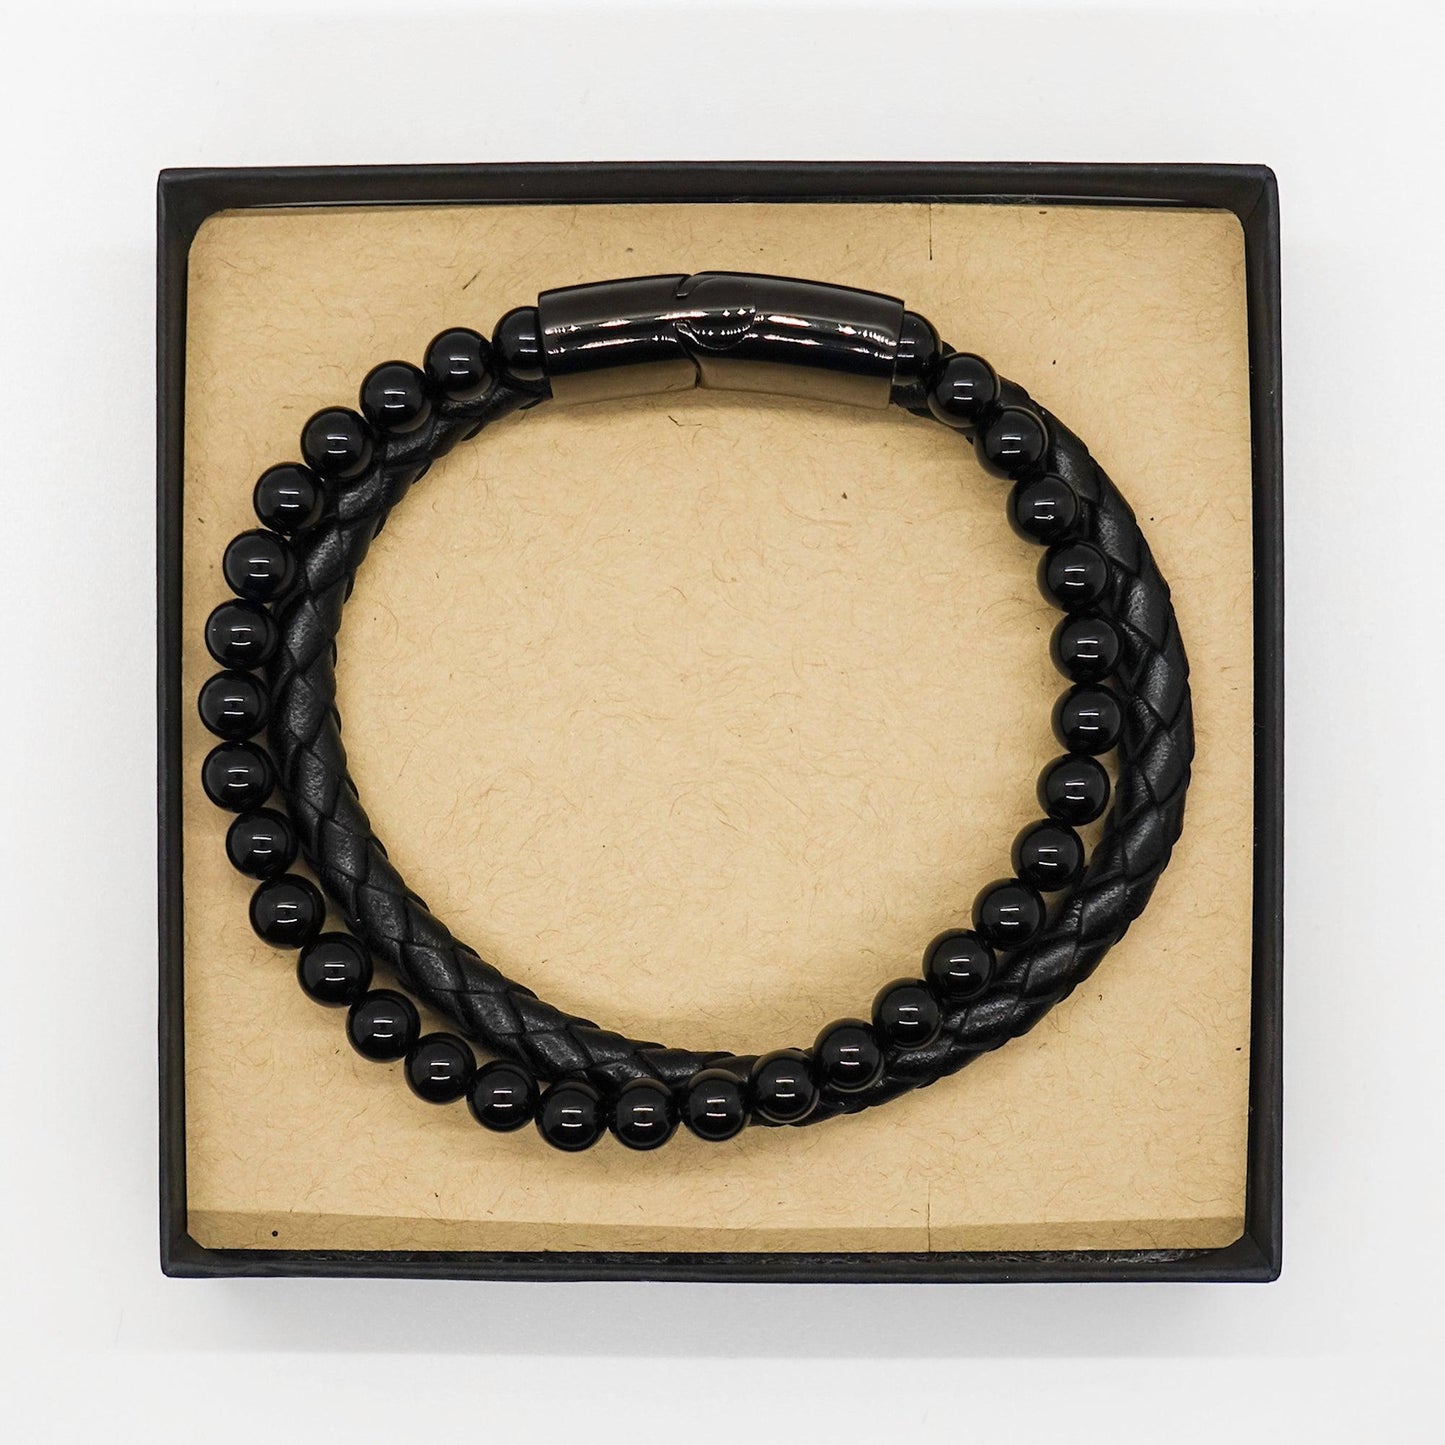 Chiropractor Black Braided Stone Leather Bracelet - Thanks for being who you are - Birthday Christmas Jewelry Gifts Coworkers Colleague Boss - Mallard Moon Gift Shop